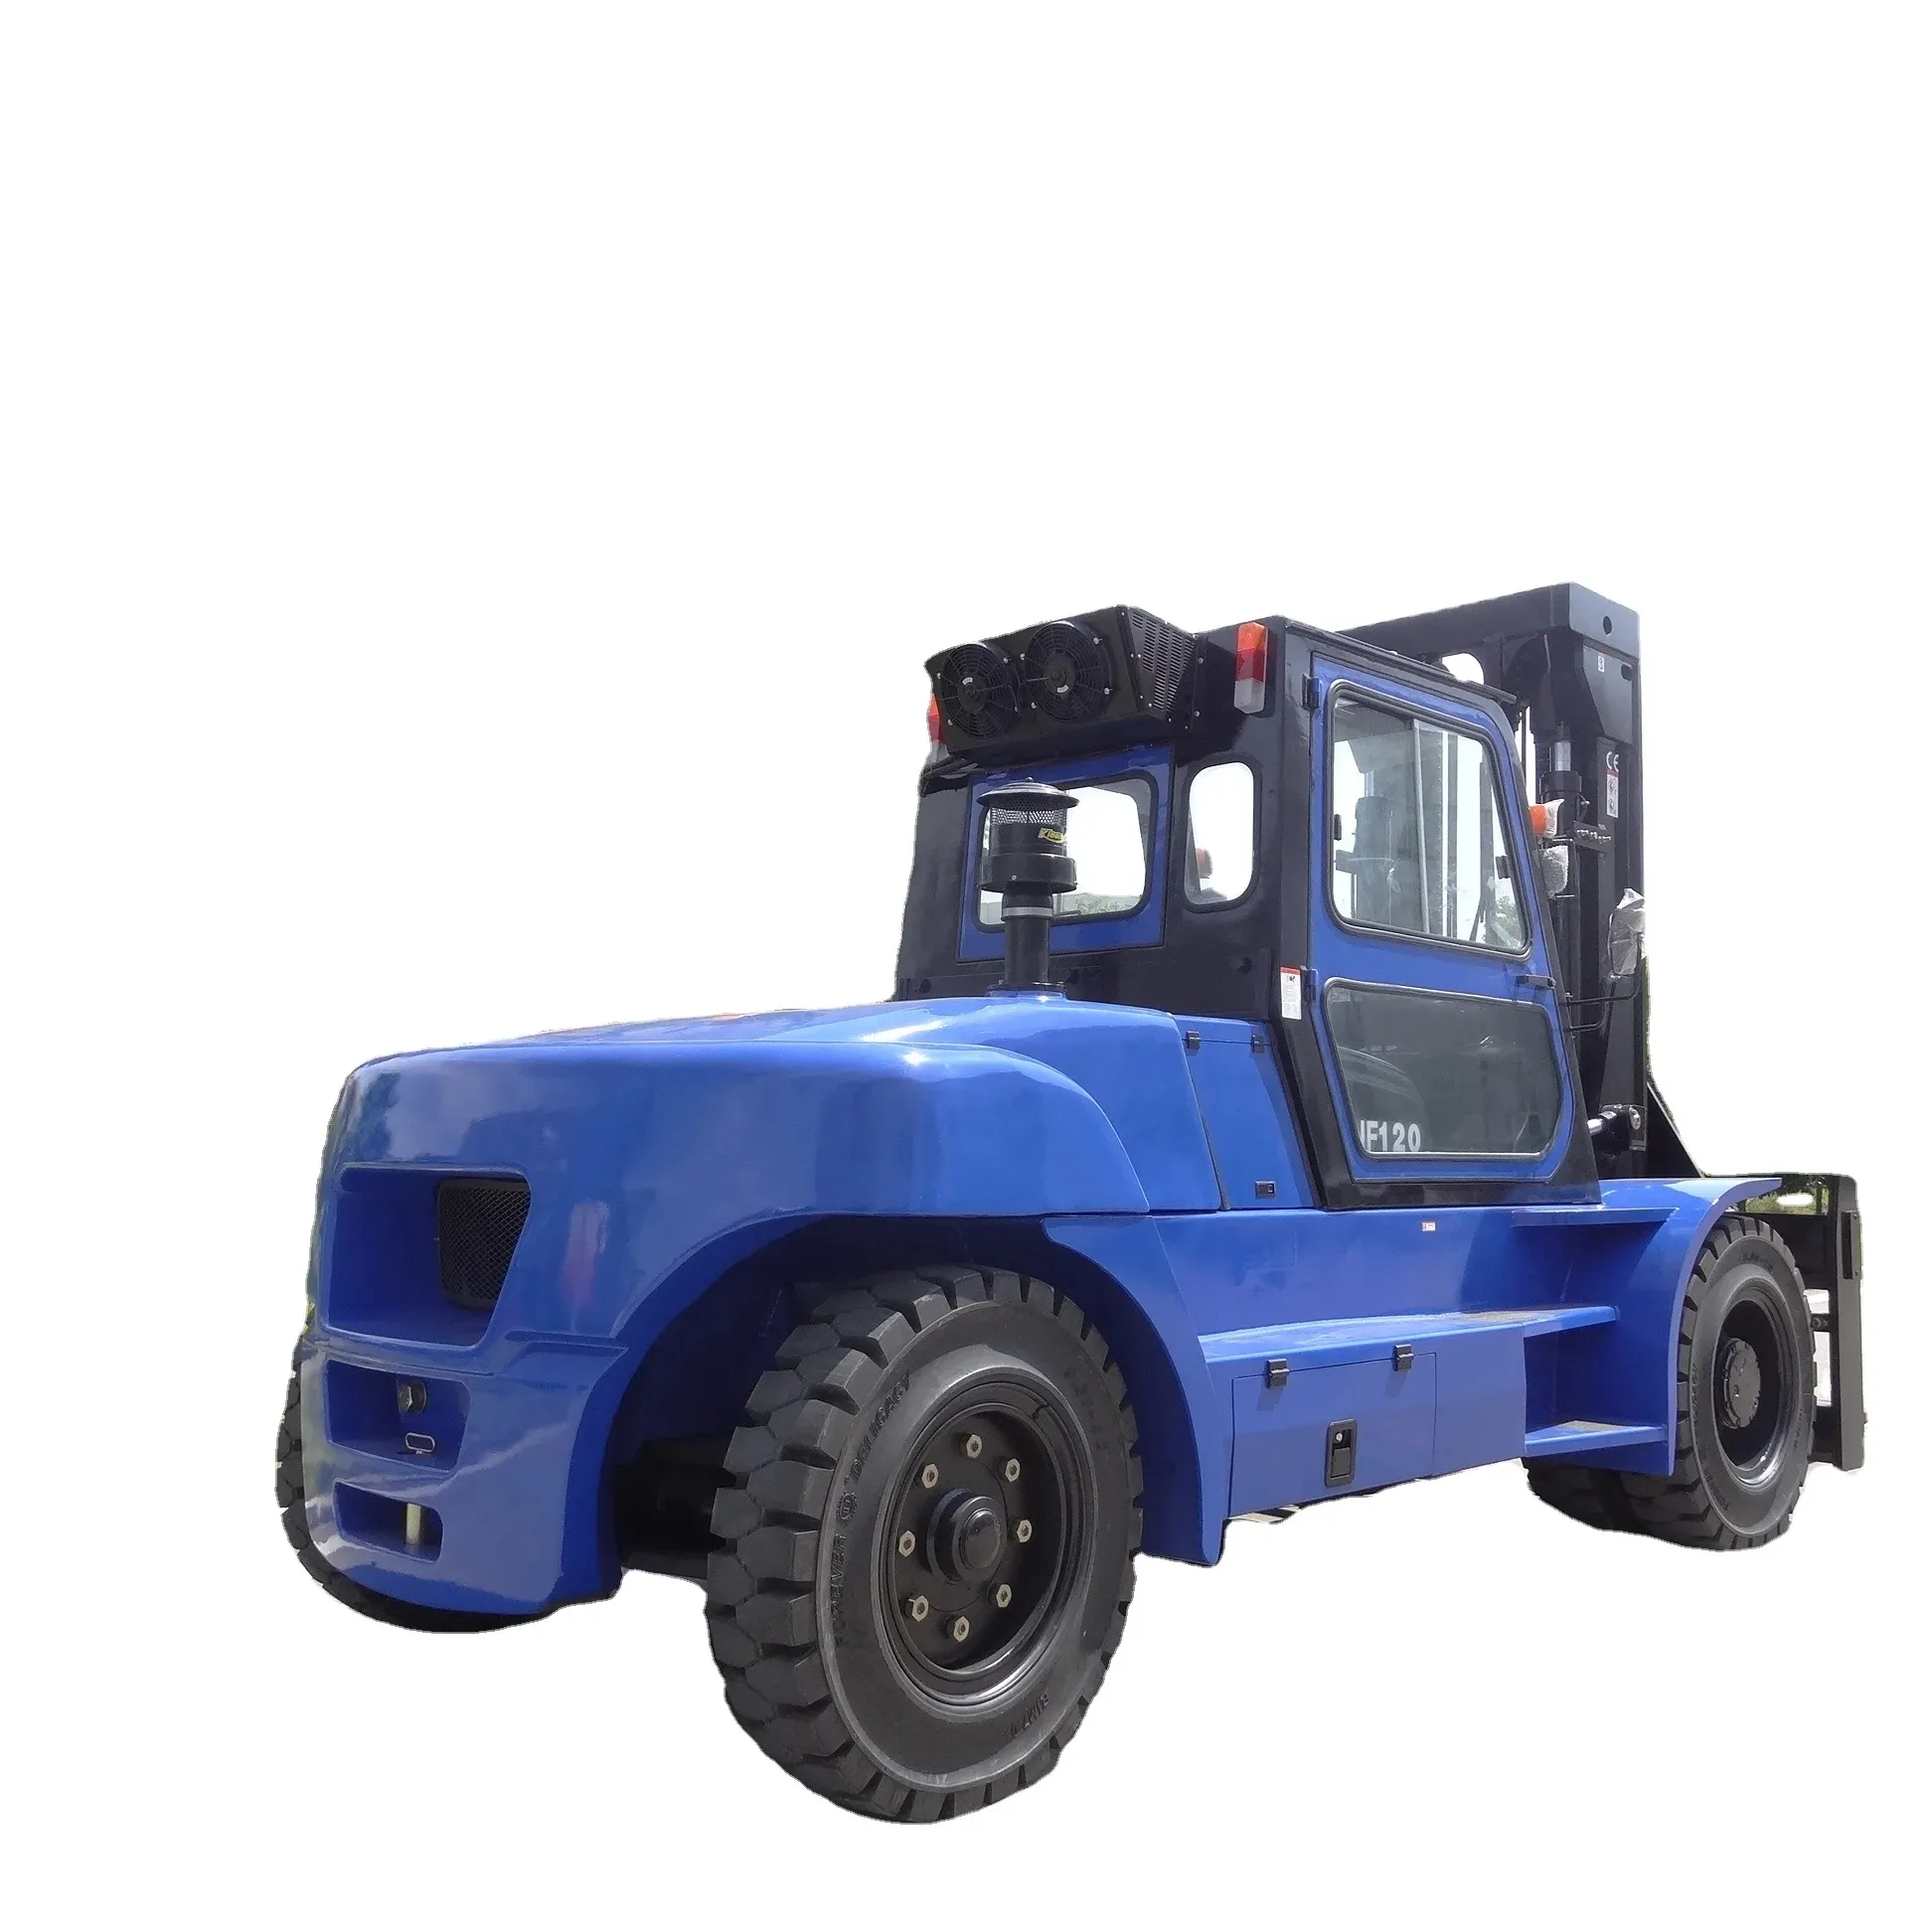 China Supplier FD120 12 Ton Diesel Forklift Used Forklifts for Food Shop and Advertising Company Hot Sale forklifts